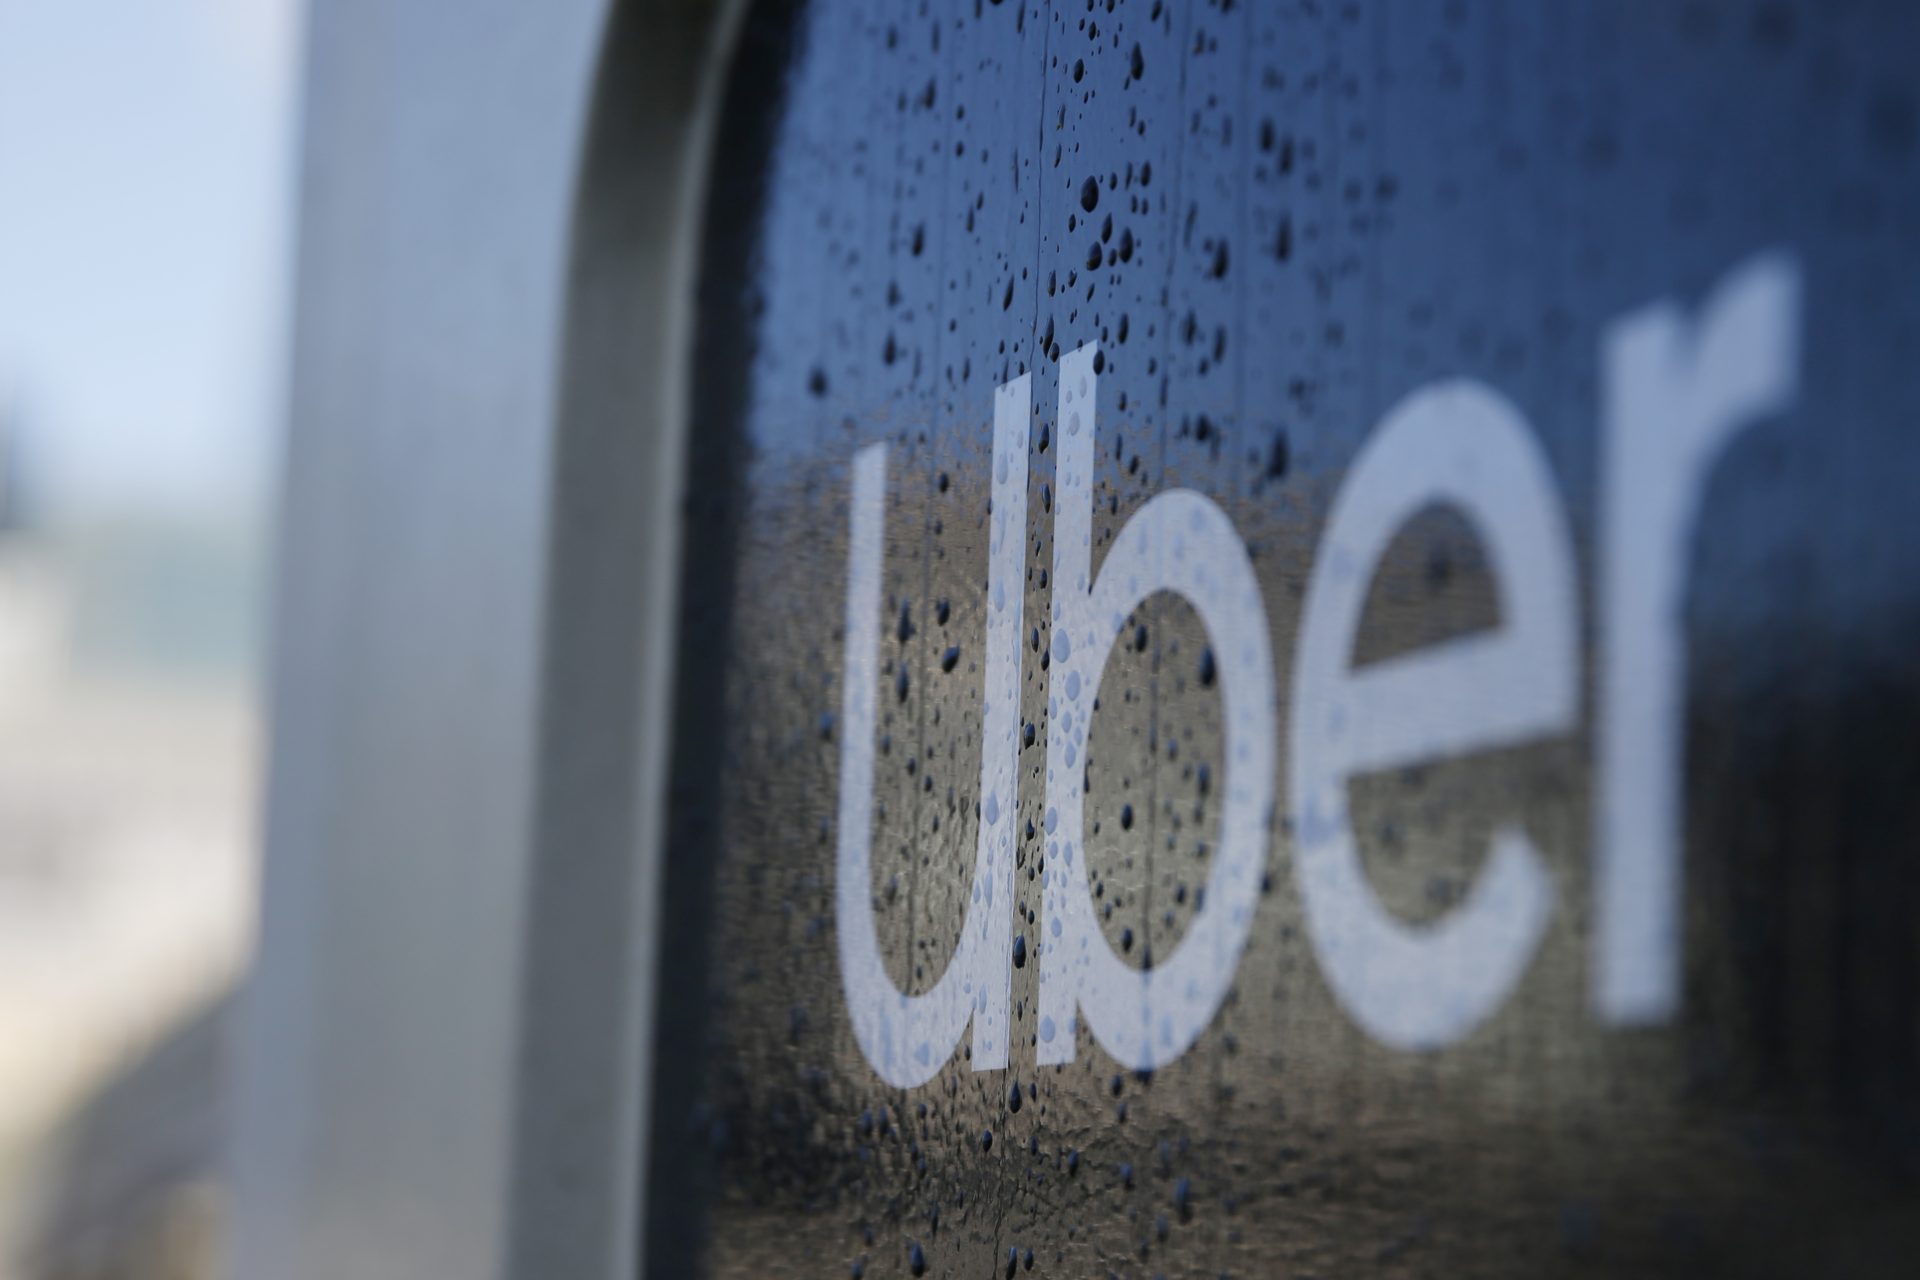 Uber has announced a lift on its face mask requirement after a Florida judge overturned the Biden administration's mandate.